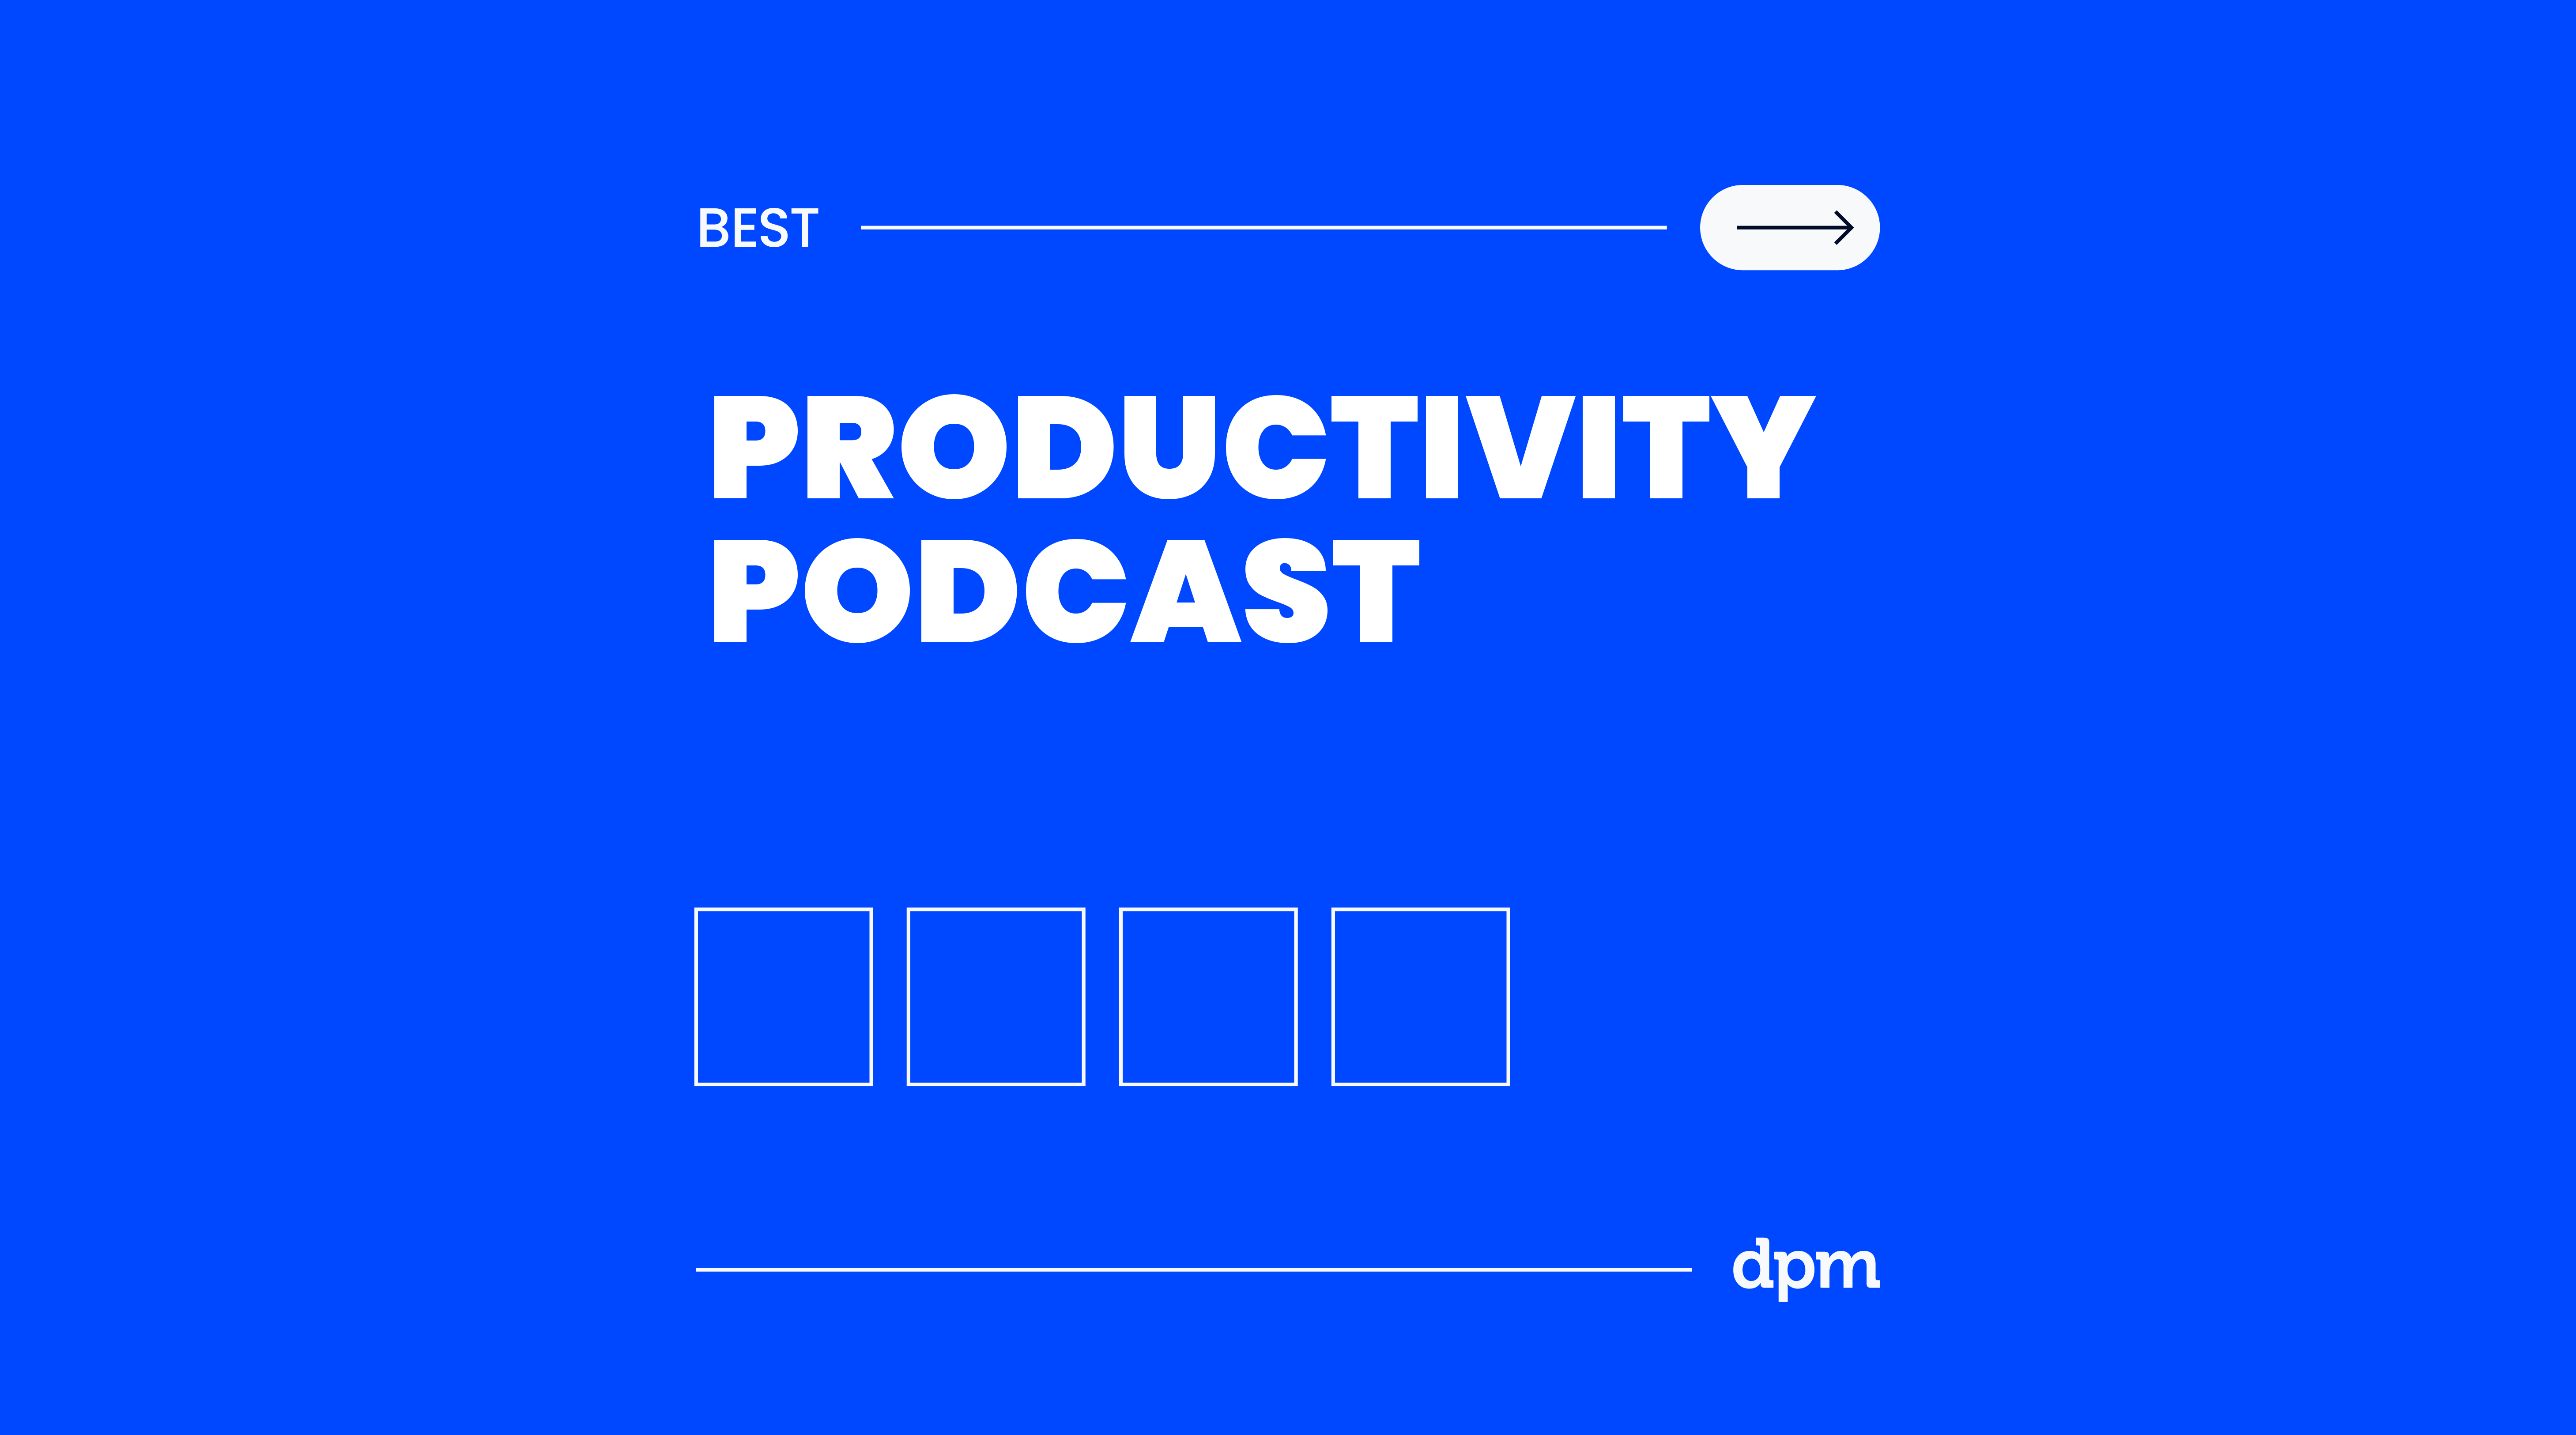 text on blue background best productivity podcast